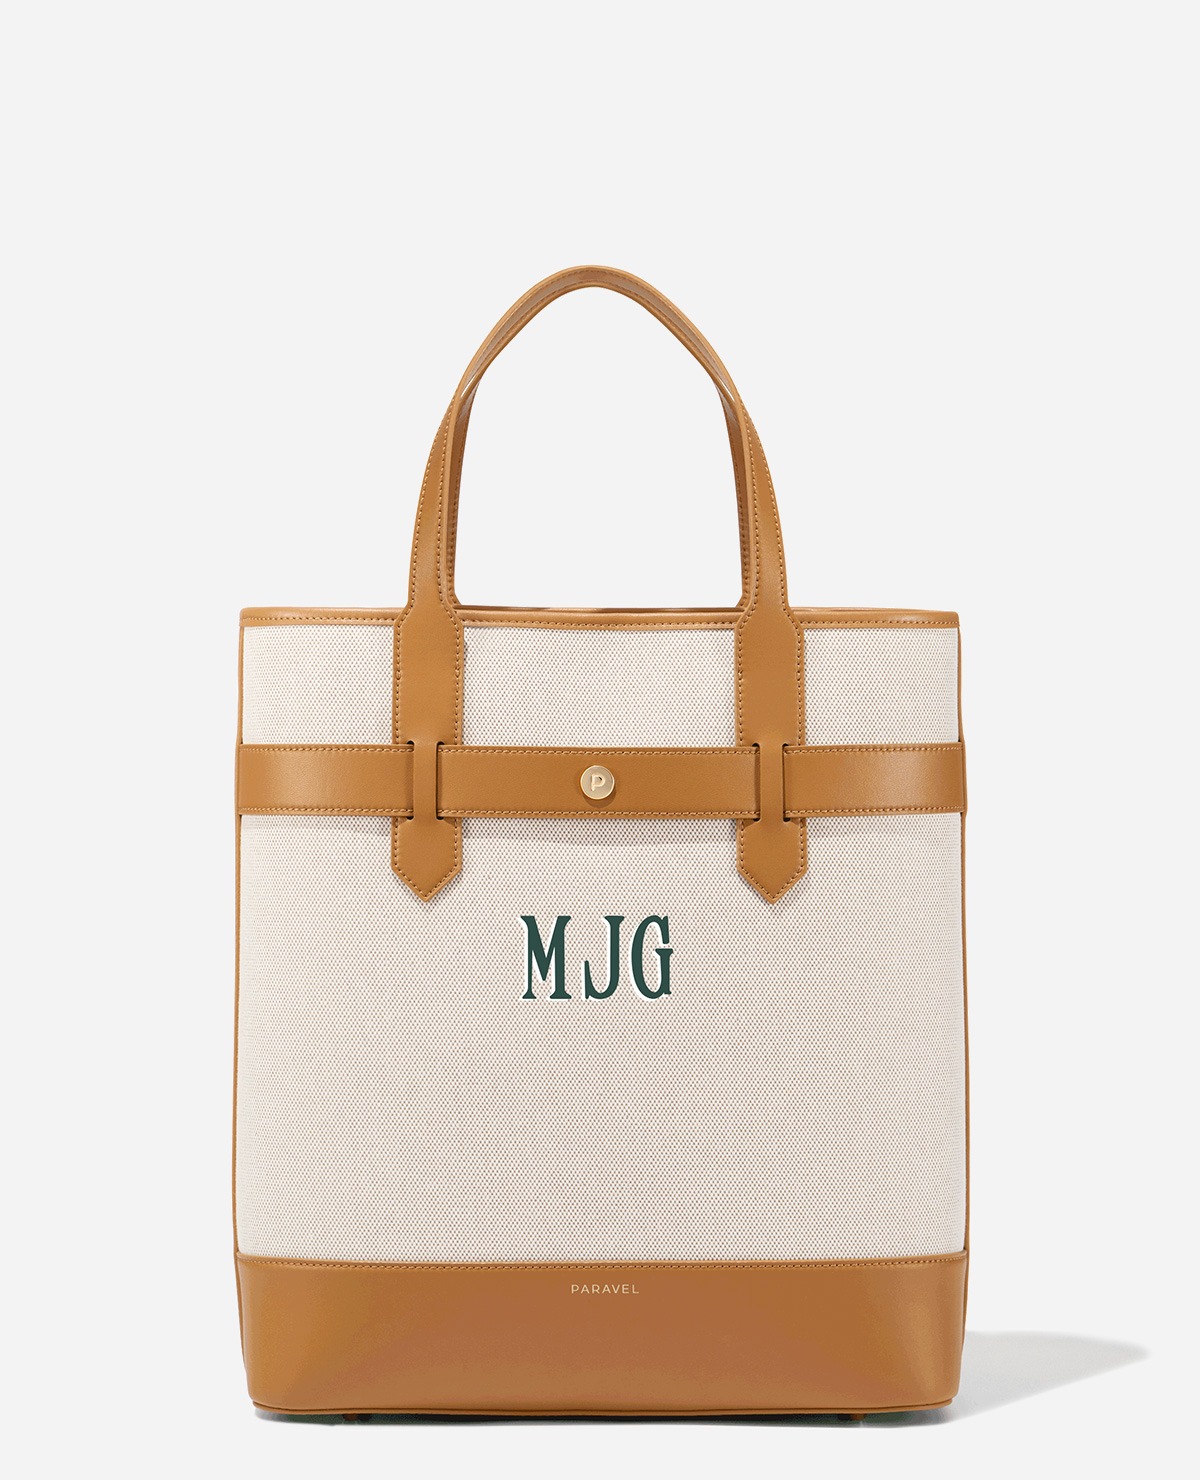 A sophisticated bag for those on the go, the Pacific Tote in